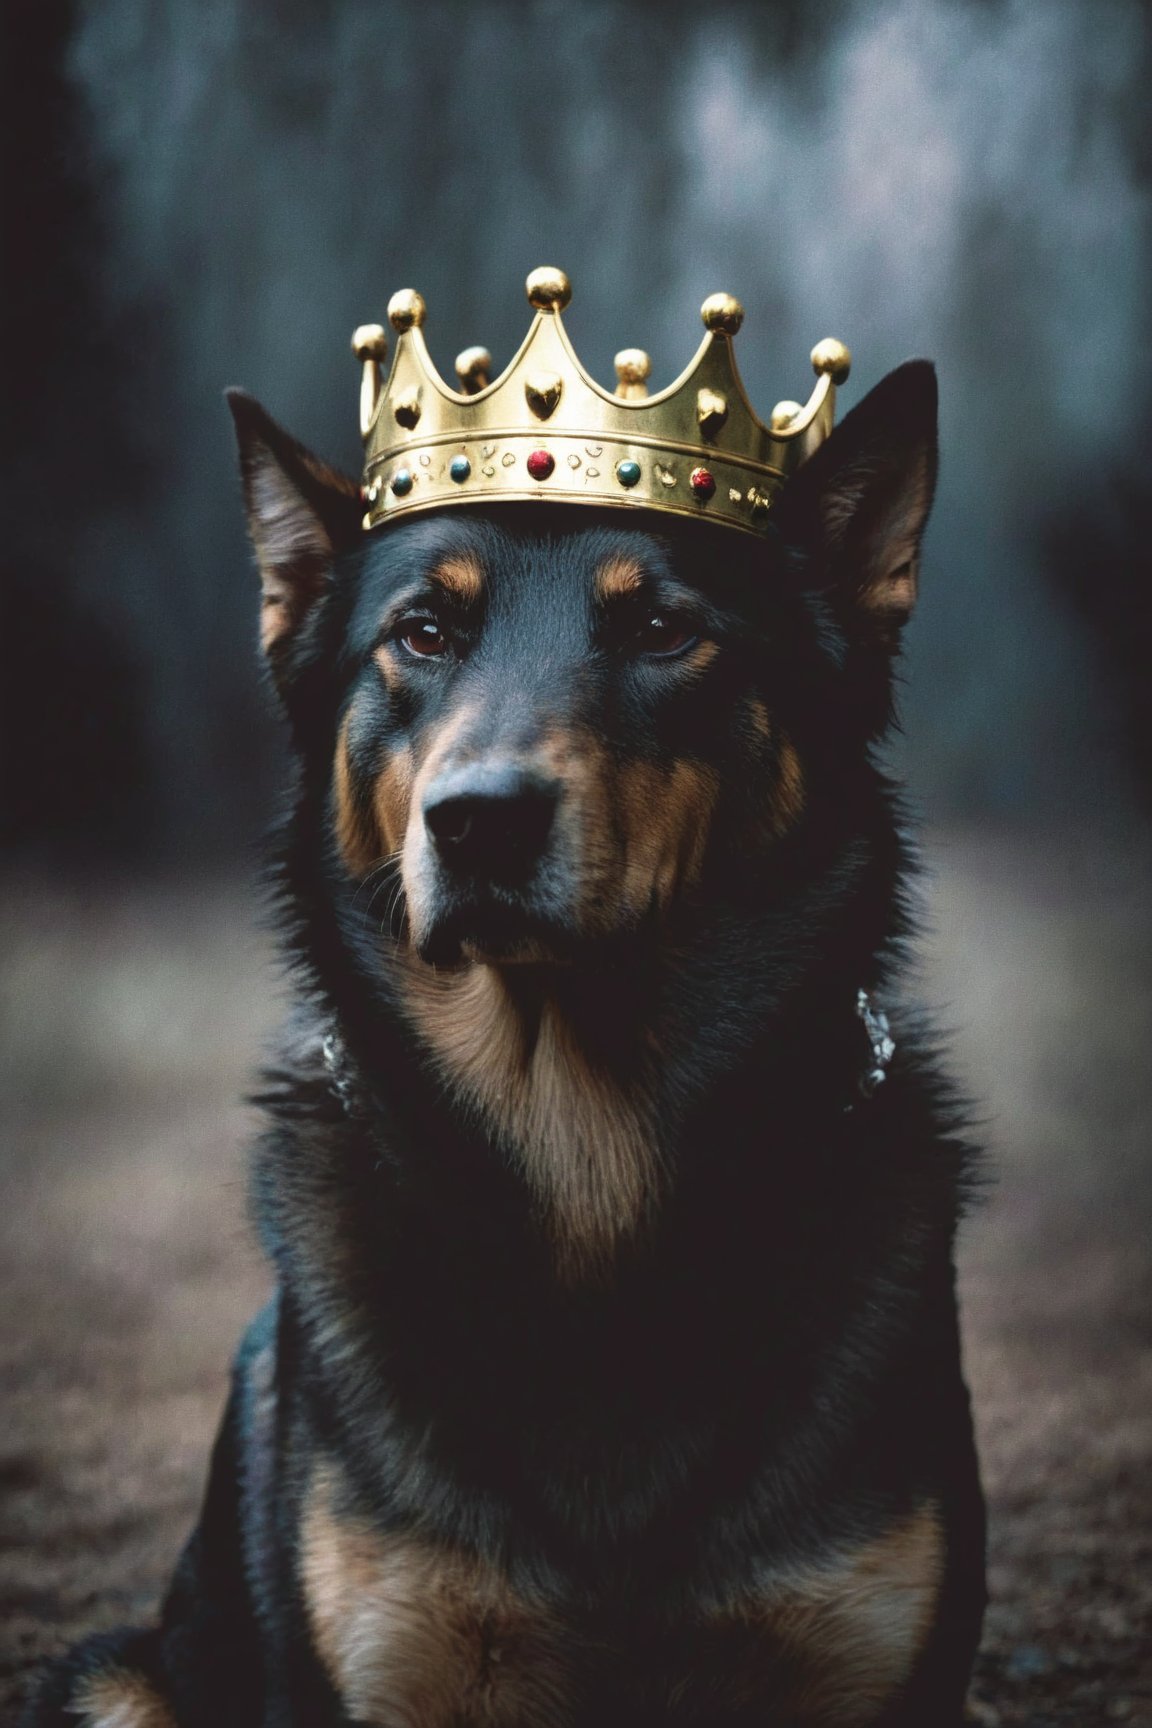 dark moody atmosphere,dark and moodyHeart full of canines, head full of voices Whole life trying to quiet 'em down Like a suicide king with a knife in his crown